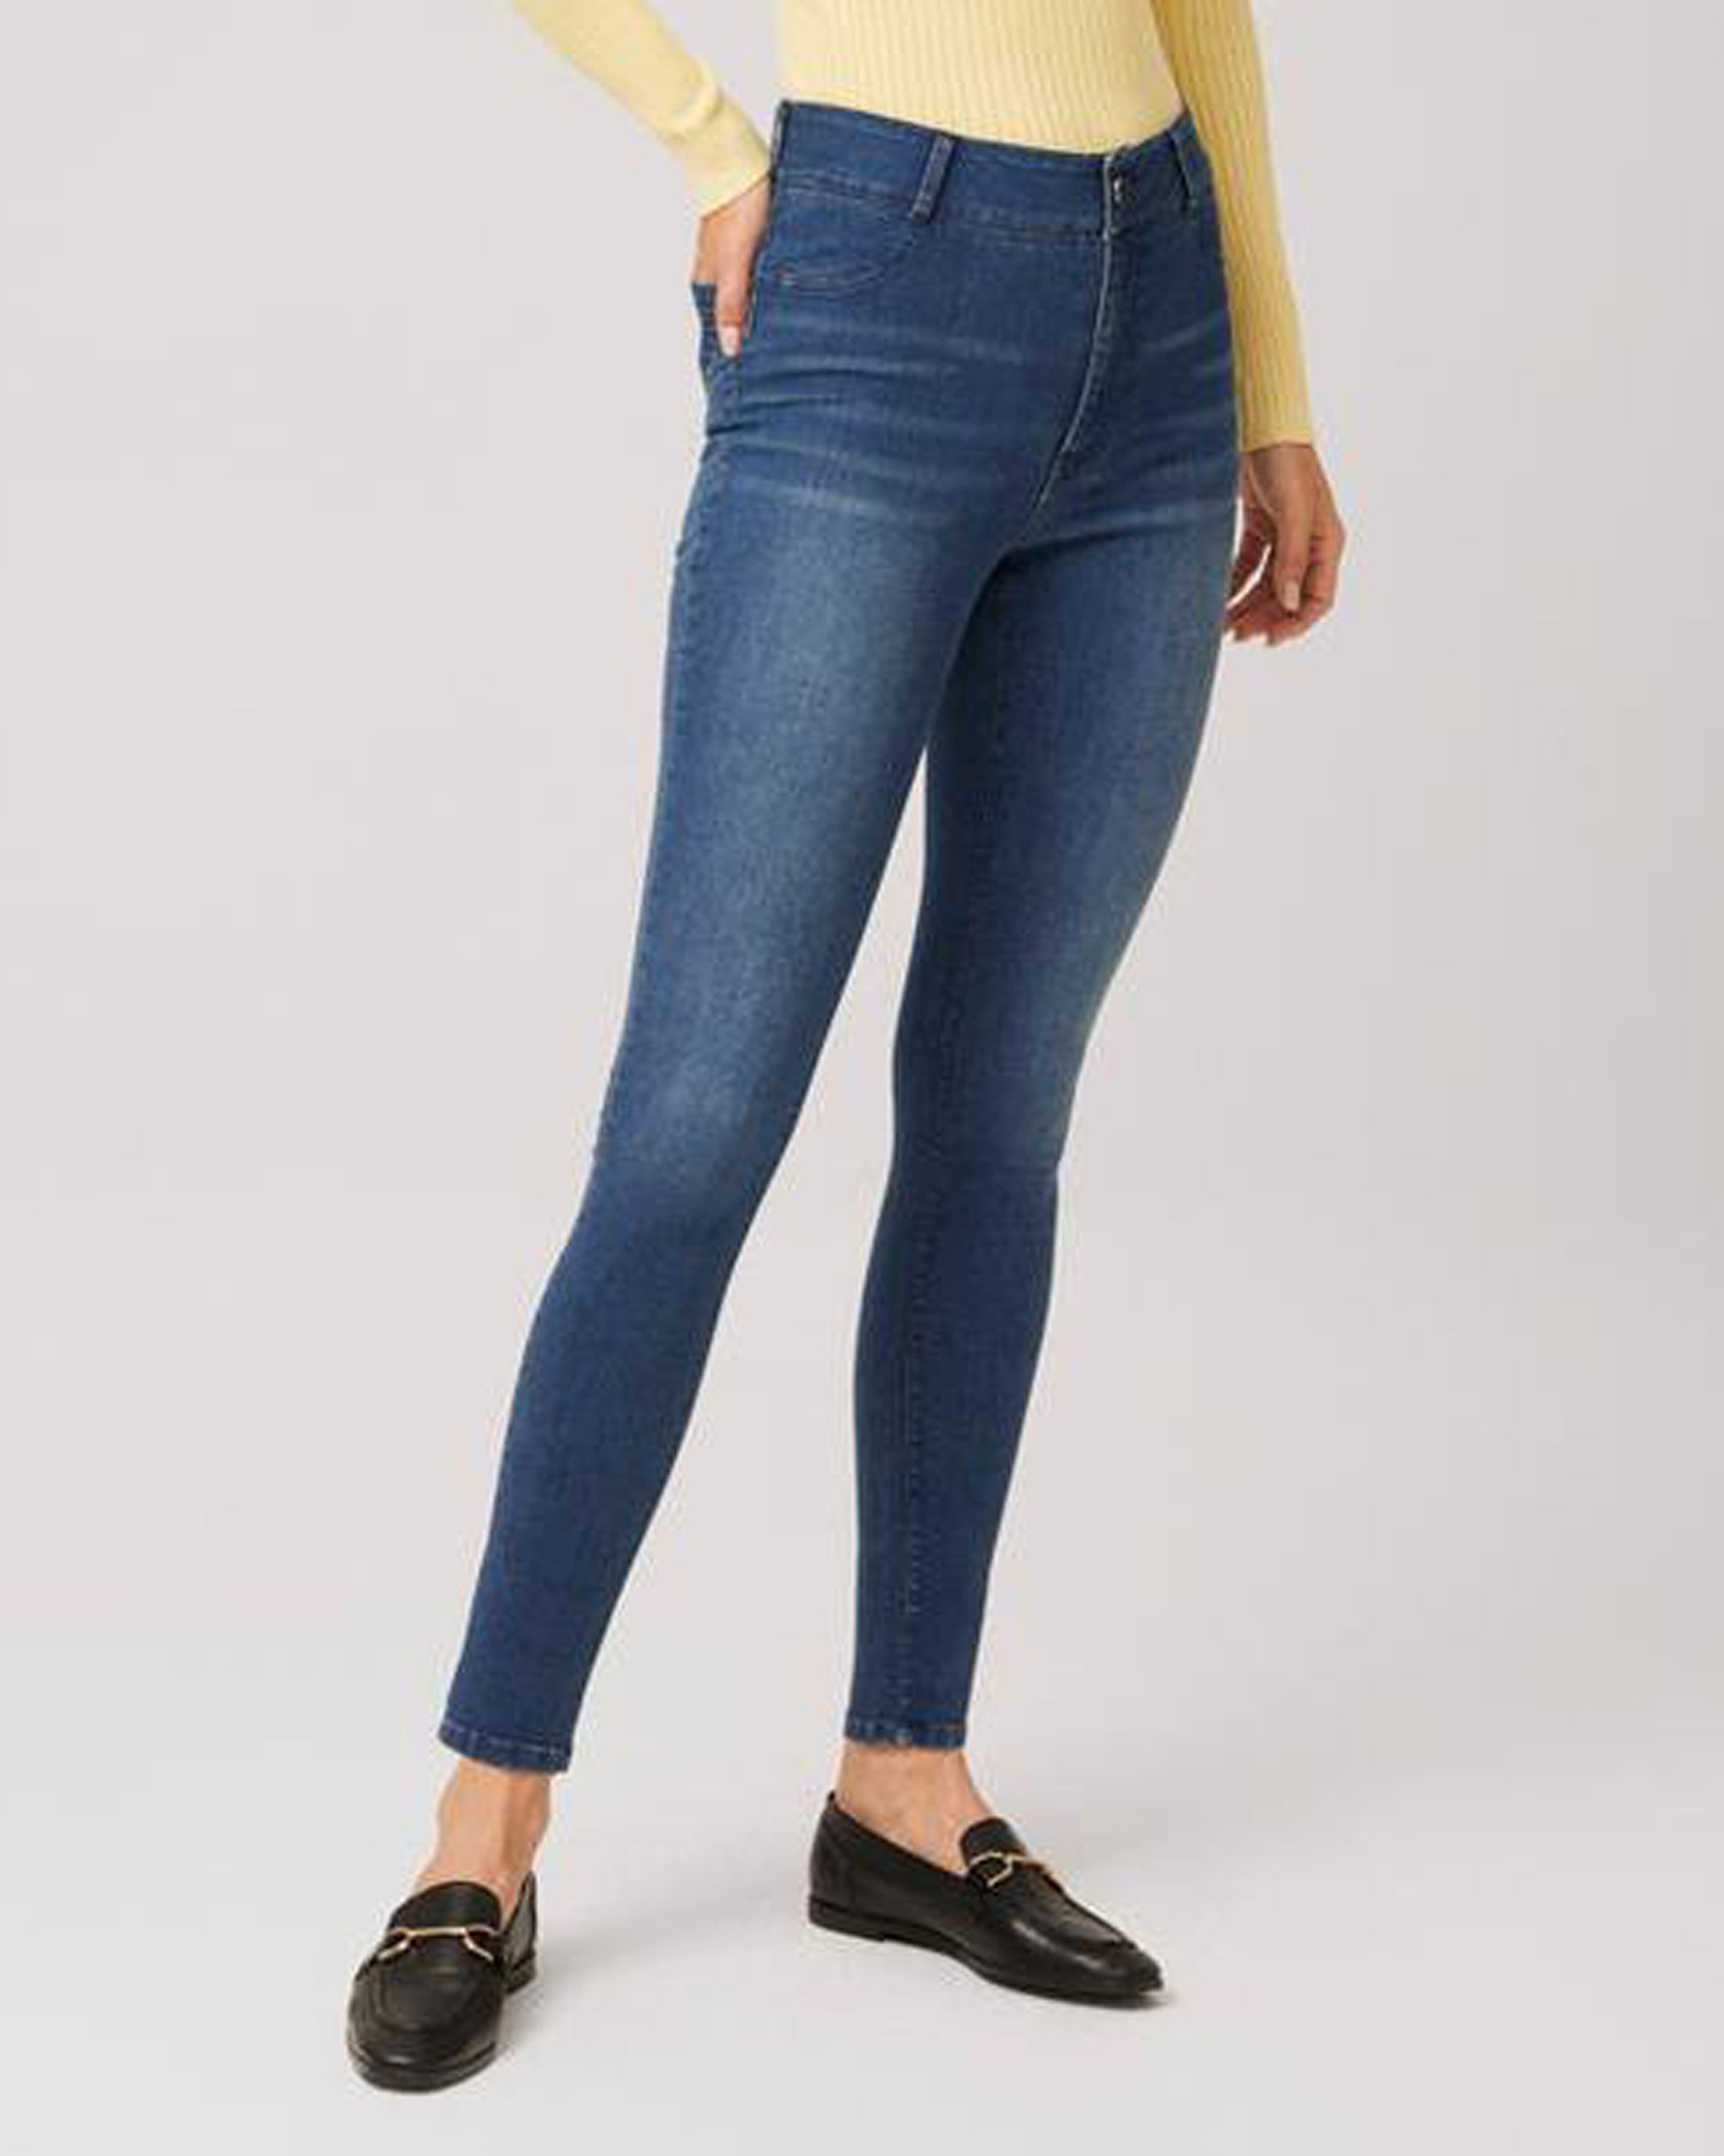 Ysabel Mora 70407 Denim Jeggings - Dark denim stretch jean leggings with faded worn effect, back pockets, belt loops, button and fly zip closures faux front pockets and fly top stitching.